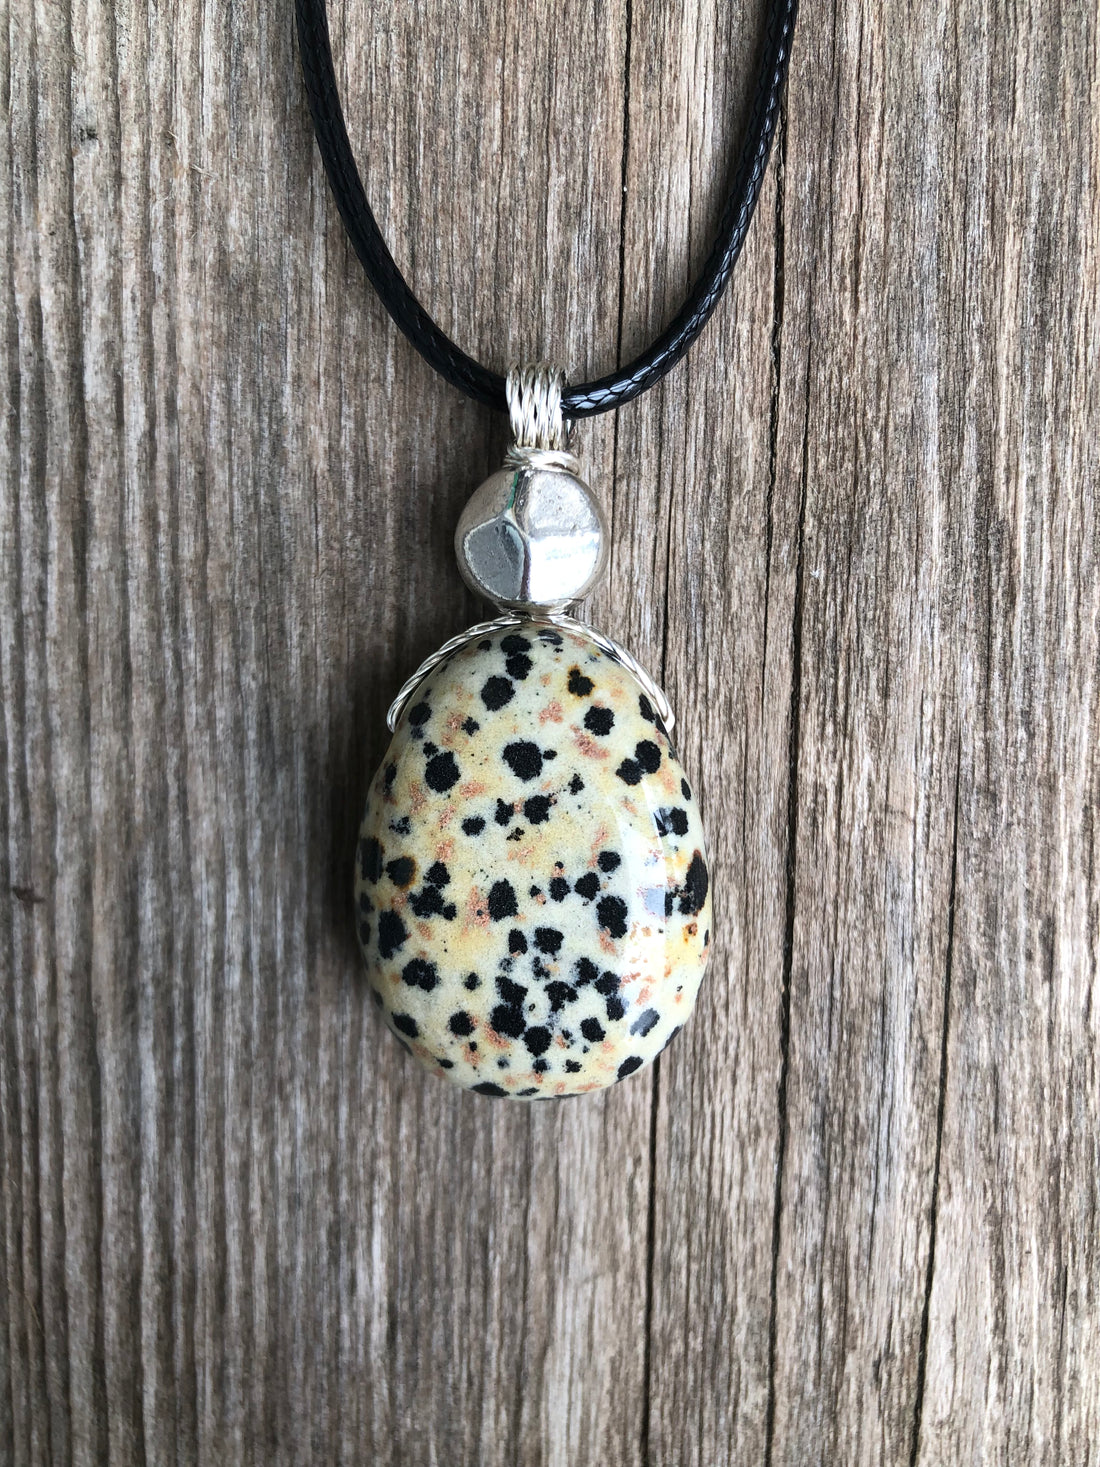 Dalmatian Jasper Necklace for Balance and Joy. Pewter Accent